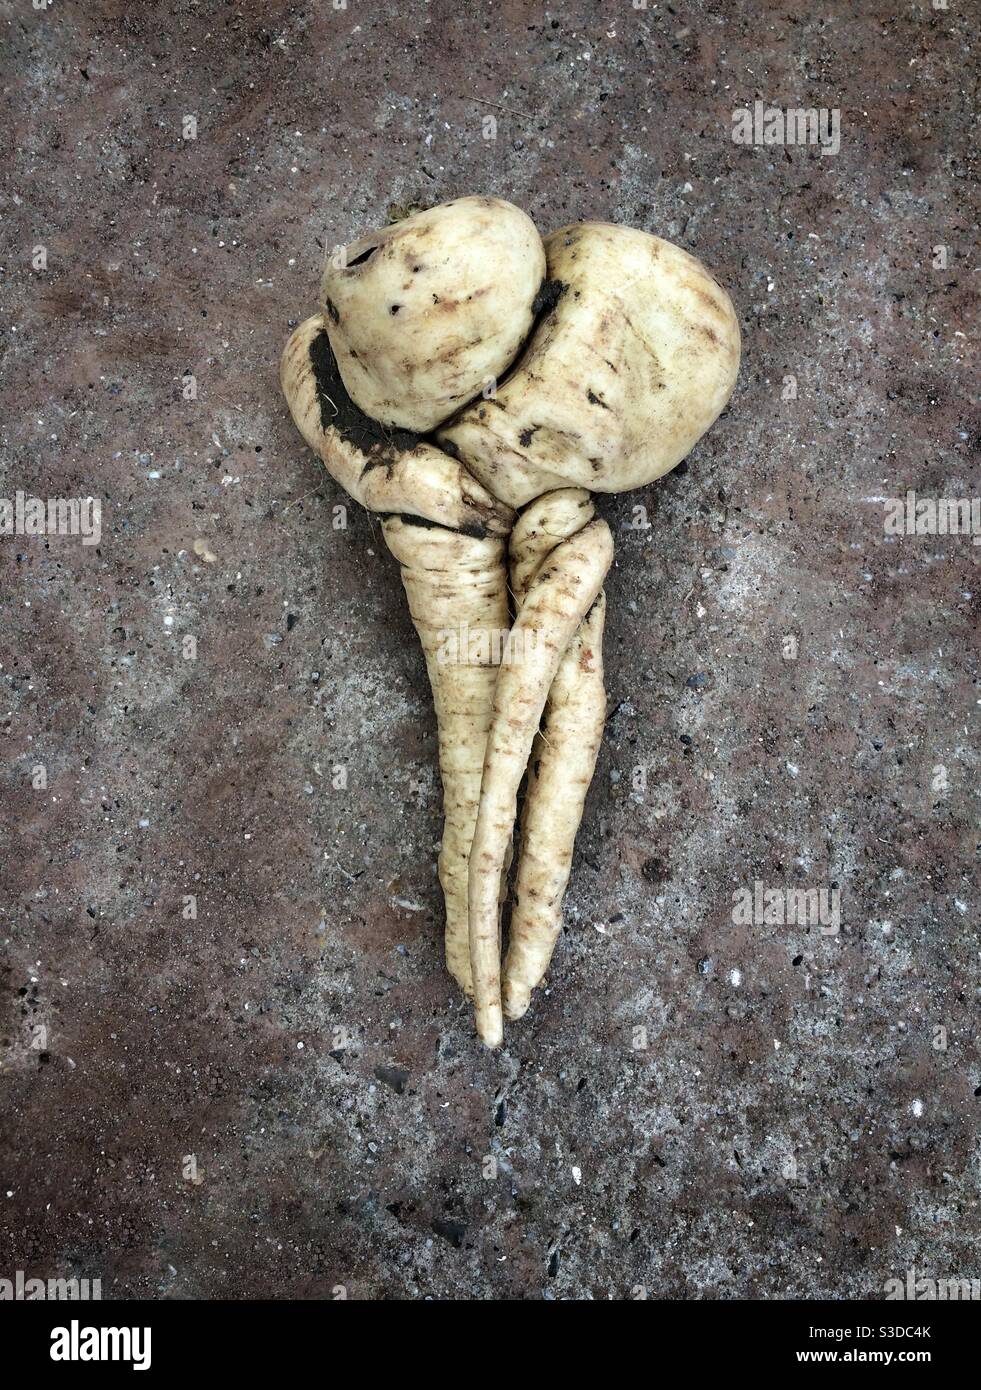 Wonky veg - a trio of organic parsnips that have grown entwined together Stock Photo